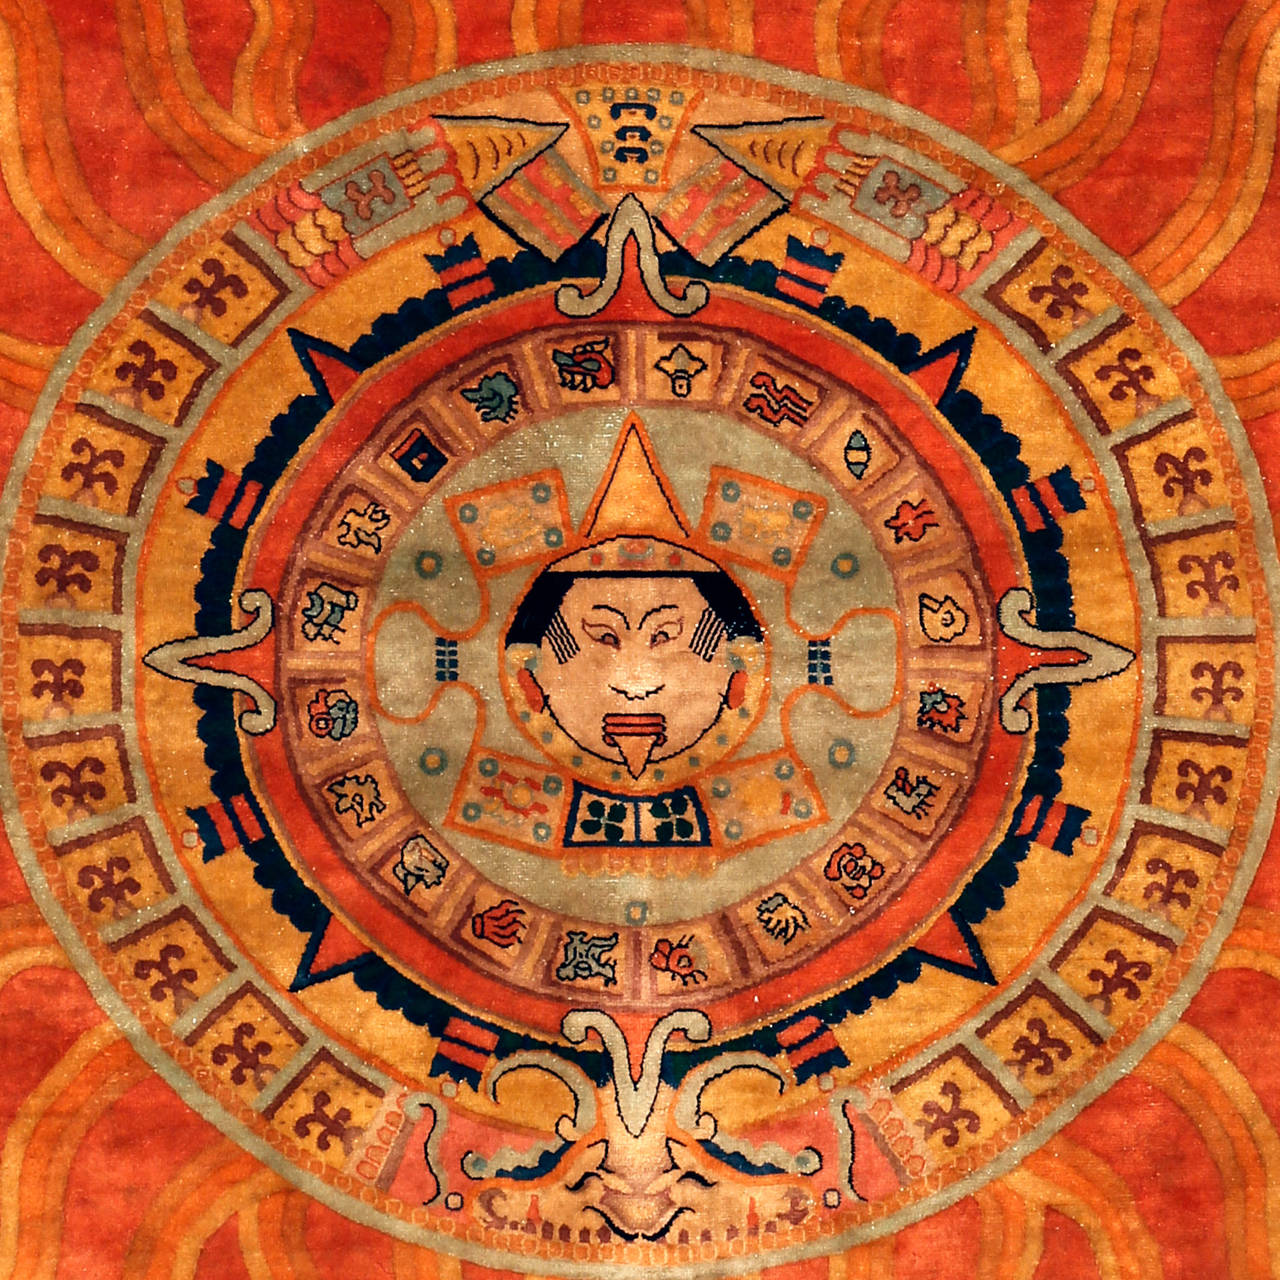 Sourced in China a few years ago, this unusual square carpet depicts the symbolism associated with the Aztec Sundial. These are inscribed in circles at the centre of which there is a human image, possibly the person responsible for the future.